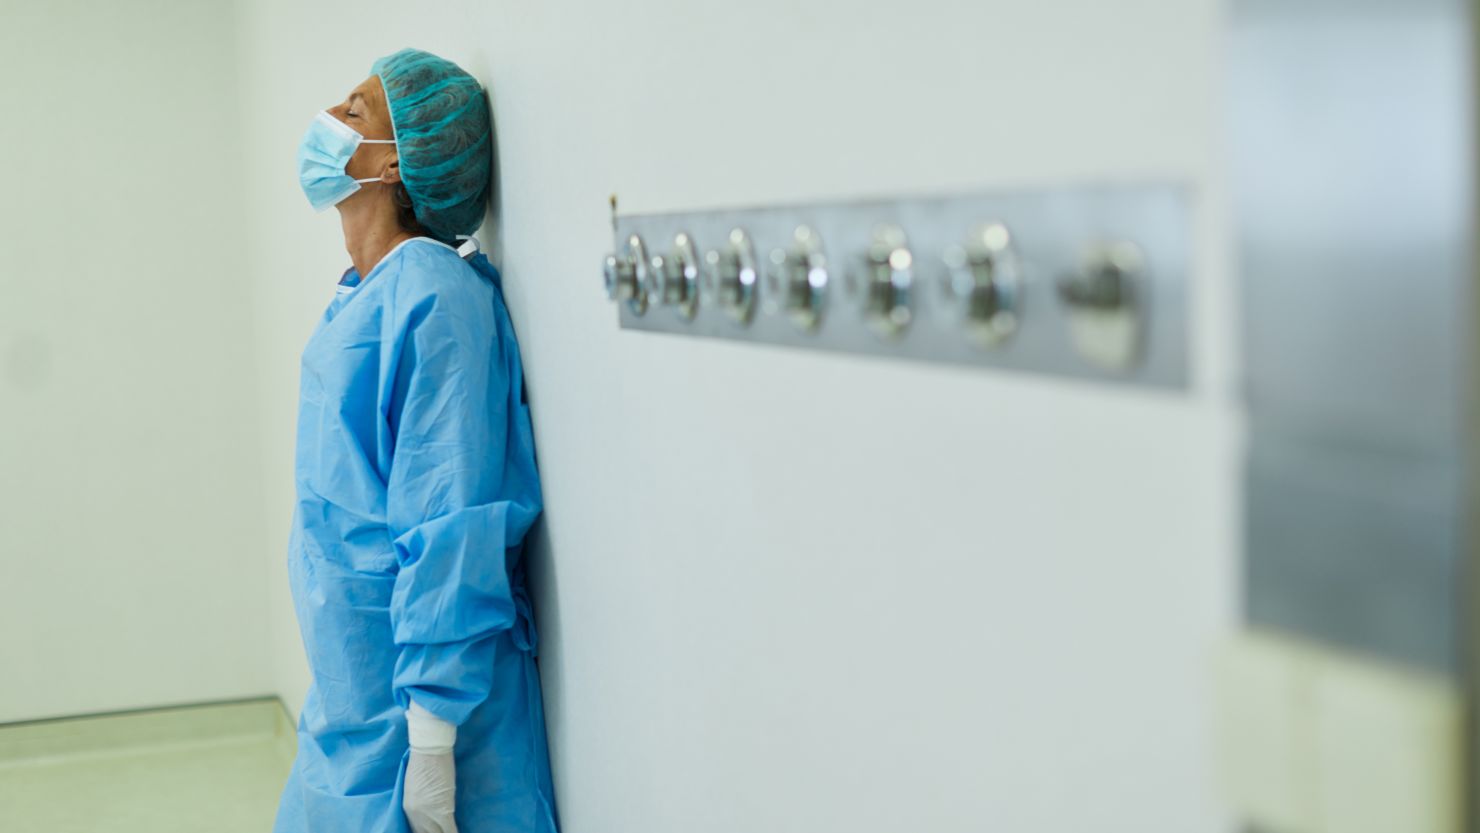 Saddened by an  unsuccessful operation this tired surgical nurse still wearing her surgical gown, mask, cap and gloves takes a moment to recover by leaning back against the wall for support. Blurred right side, three quarter length with copy space.